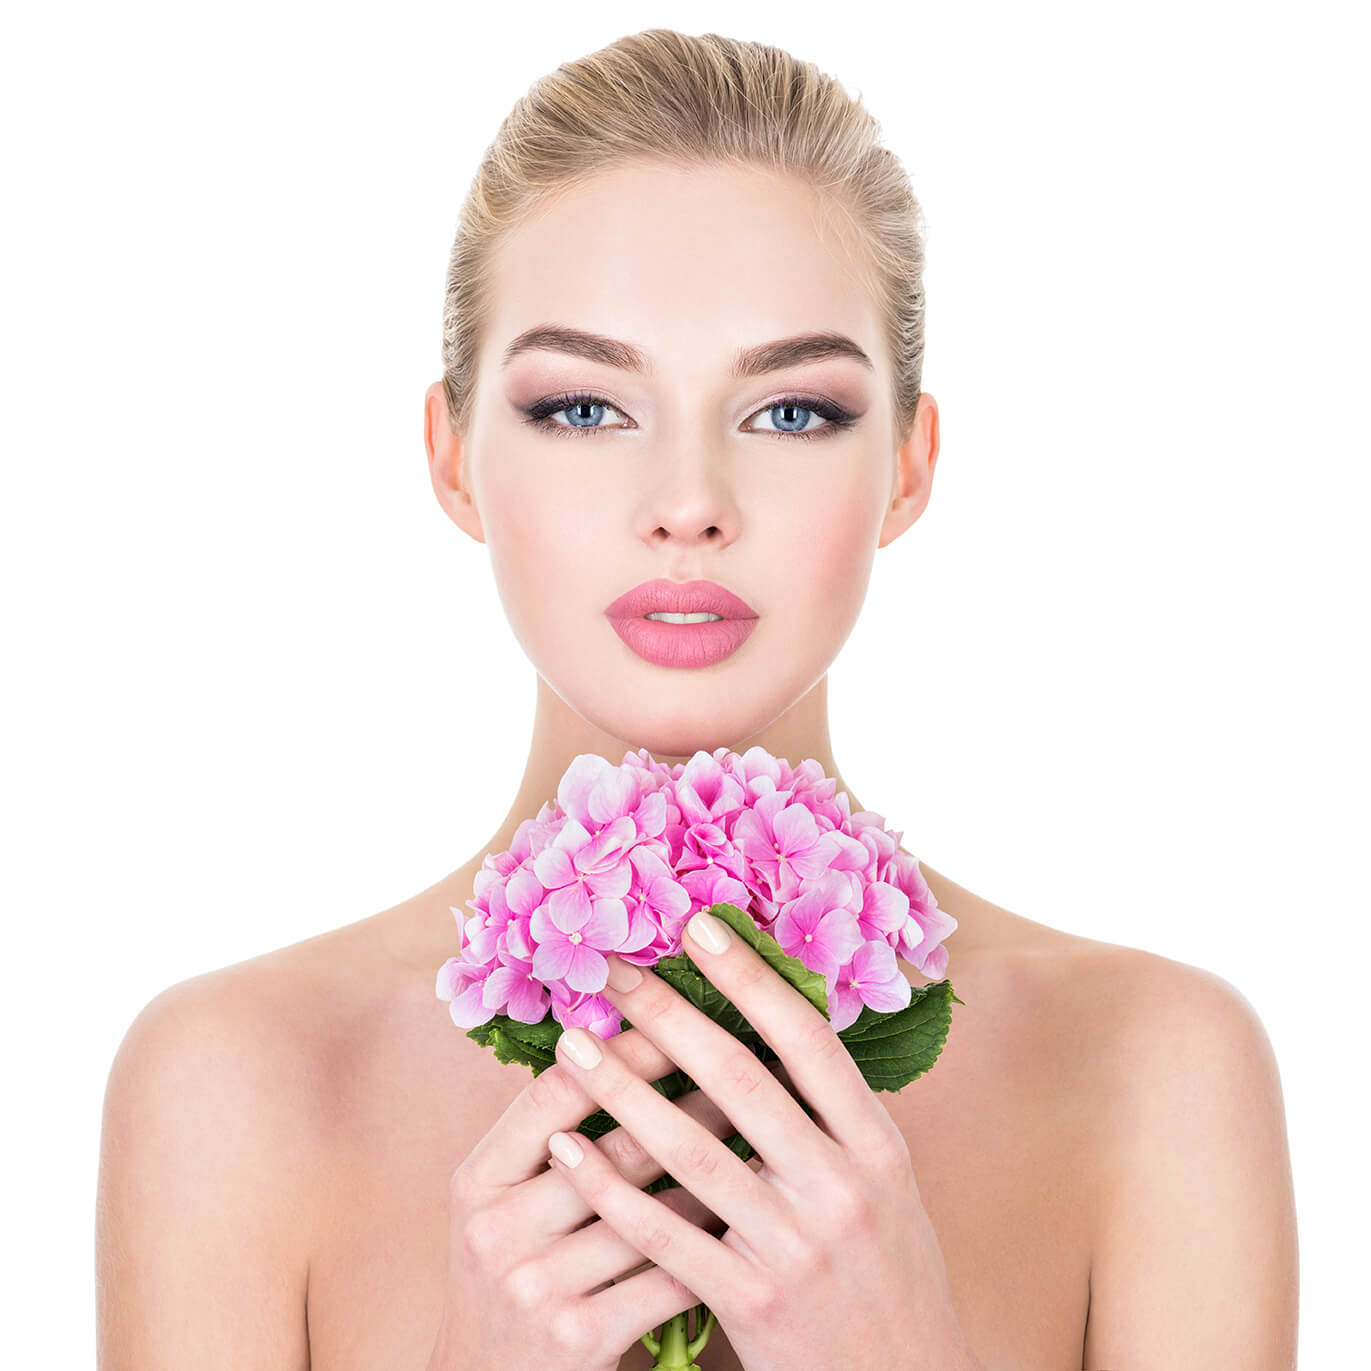 young-beautiful-woman-with-flowers-near-face (1) (1)